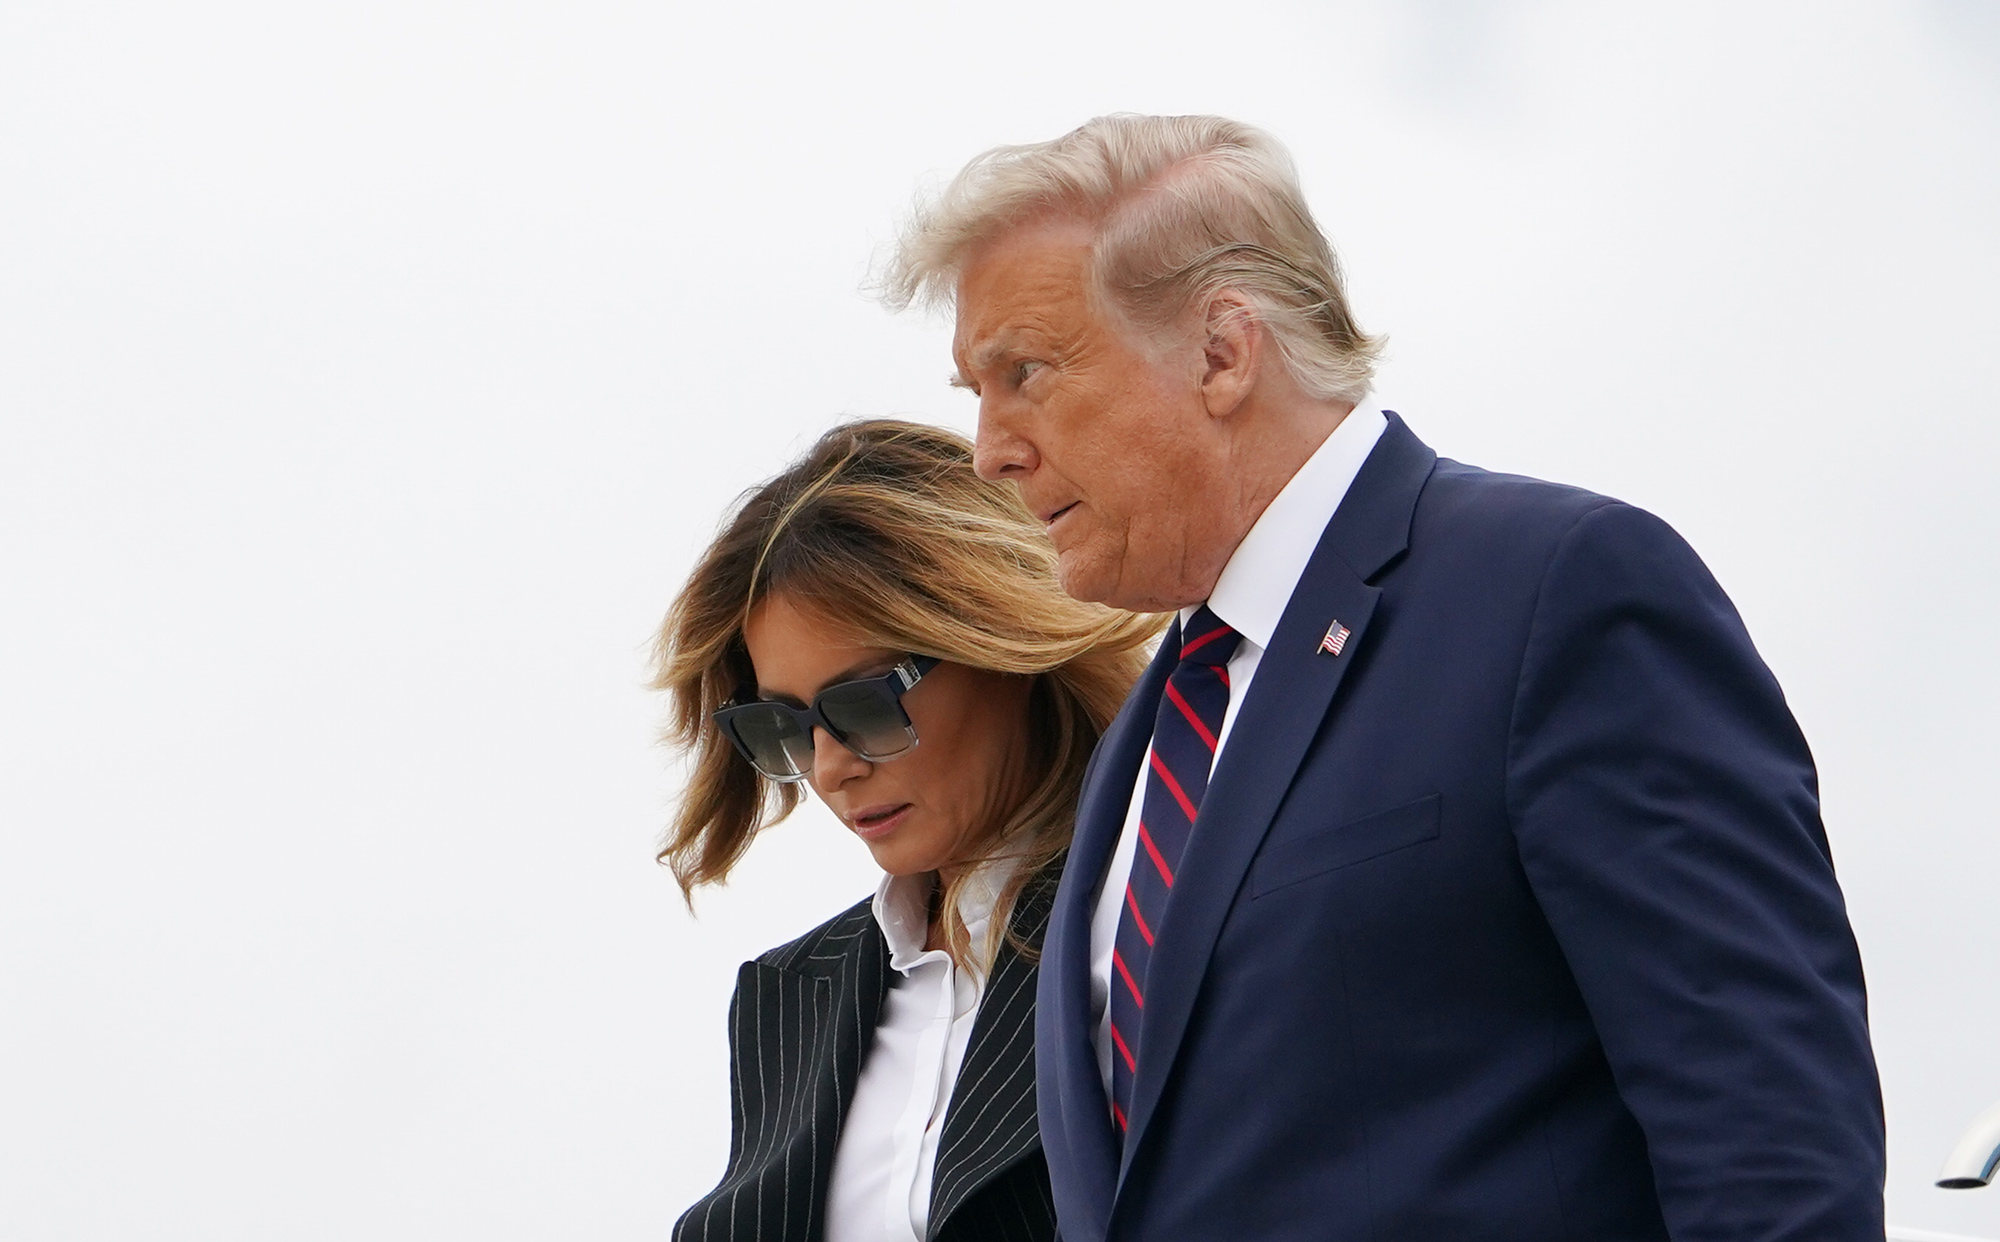 President Donald Trump and First Lady Melania Trump step off Air Force One upon arrival at Cleveland Hopkins International Airport in Cleveland, Ohio on September 29.